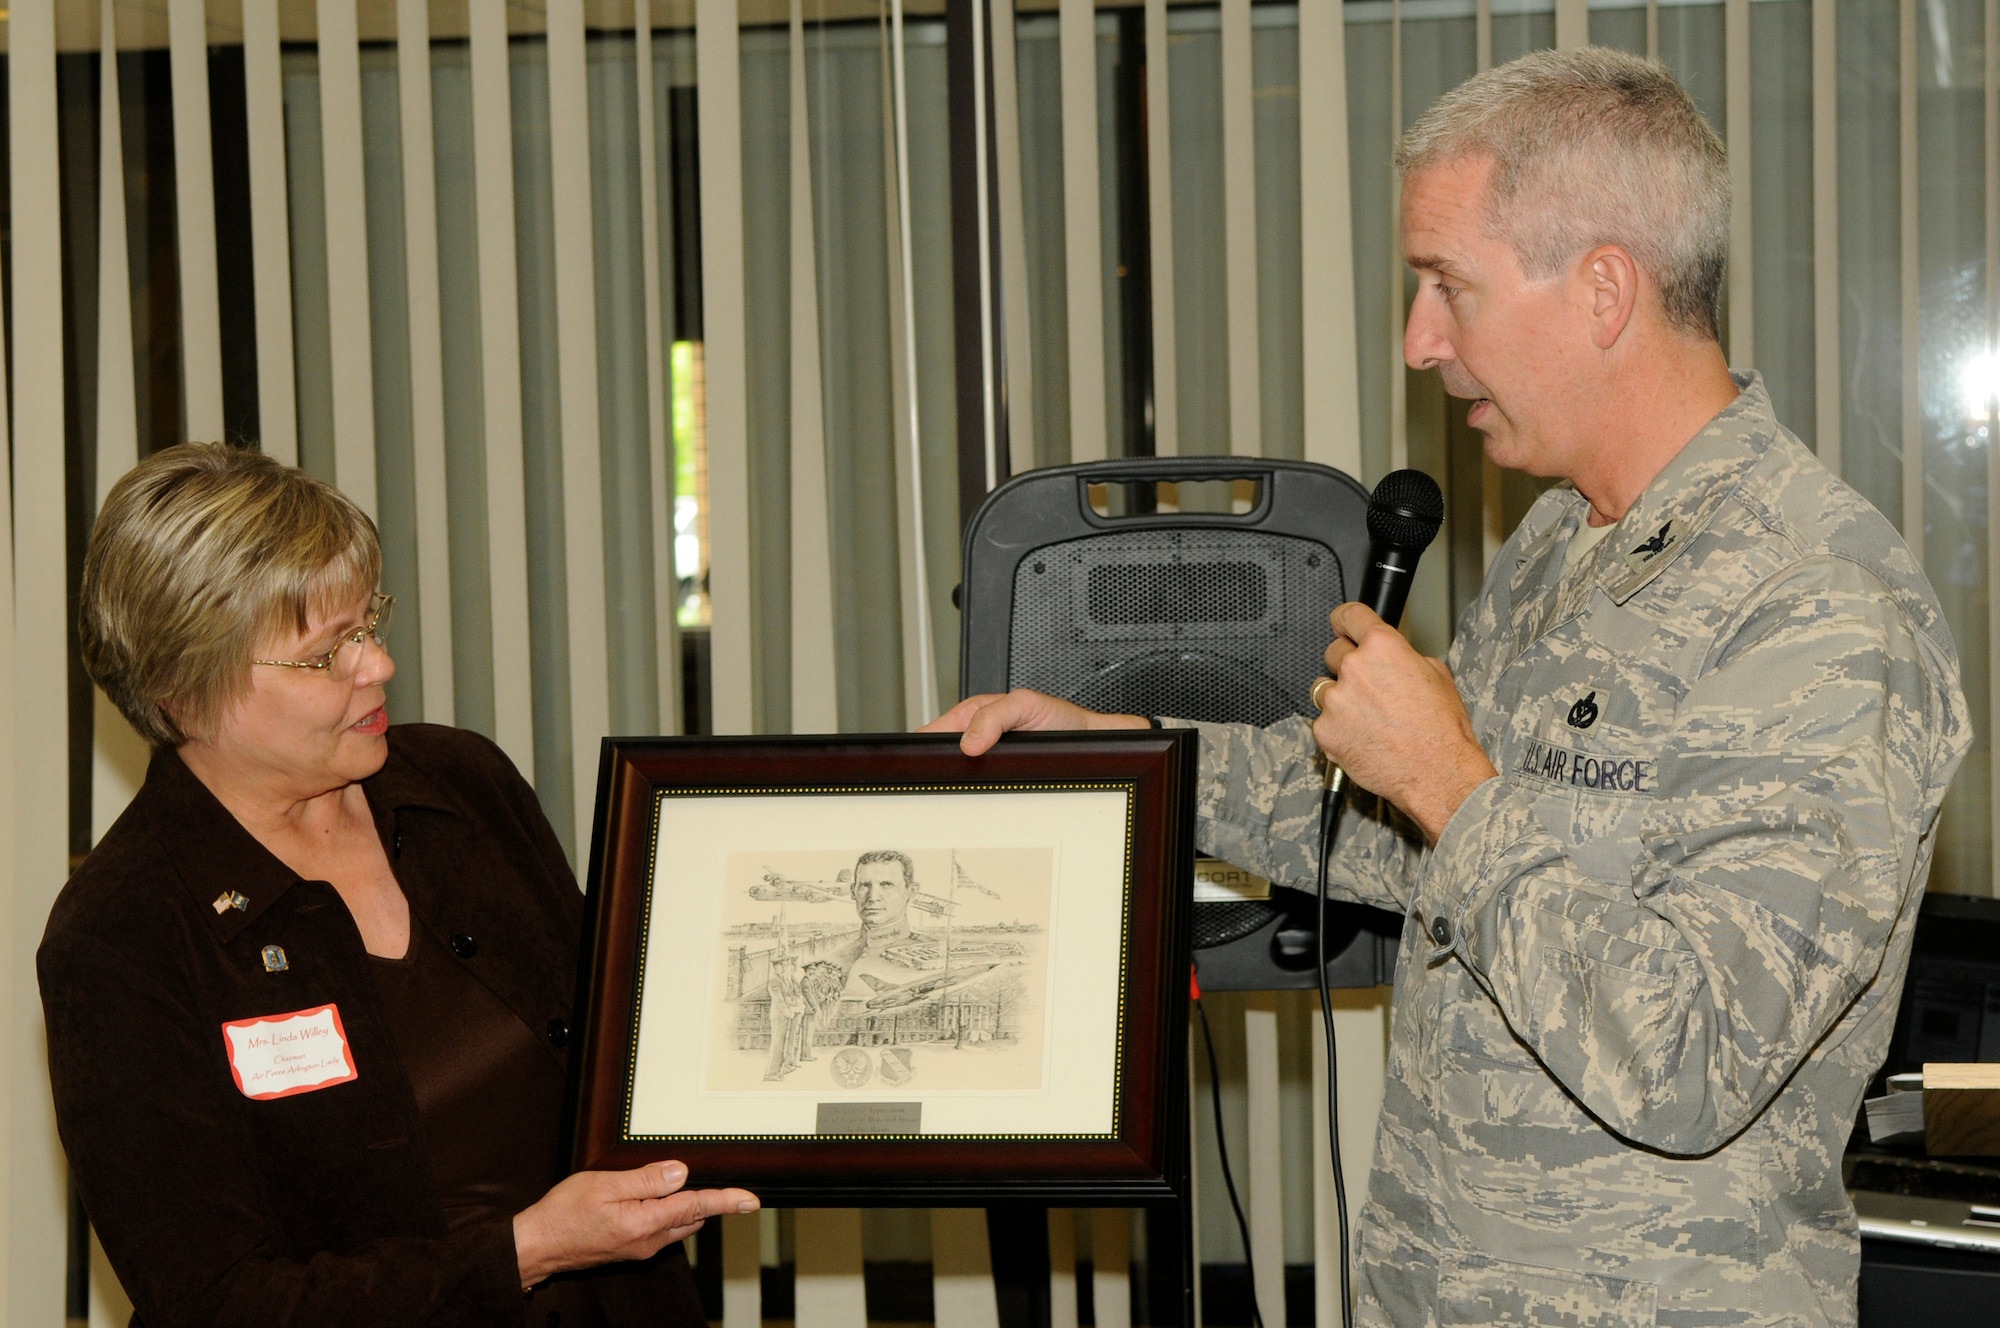 Col. Jon A. Roop, 11th Wing commander, presents Linda Willey, Air Force Arlington Ladies Chairperson, with a plaque honoring the them for 60 years of service. Today, there is an Air Force Arlington Lady or Gentleman present at each service held for active duty, retired or veteran servicemembers buried at Arlington. As part of the ceremony, the attending committee member presents a sympathy card to the surviving family and friends from the Air Force chief of staff as well as a personal note of condolence. If no loved ones are present, a letter describing the ceremony is written and mailed along with the notes. (U.S. Air Force photo by Staff Sgt. Raymond Mills)